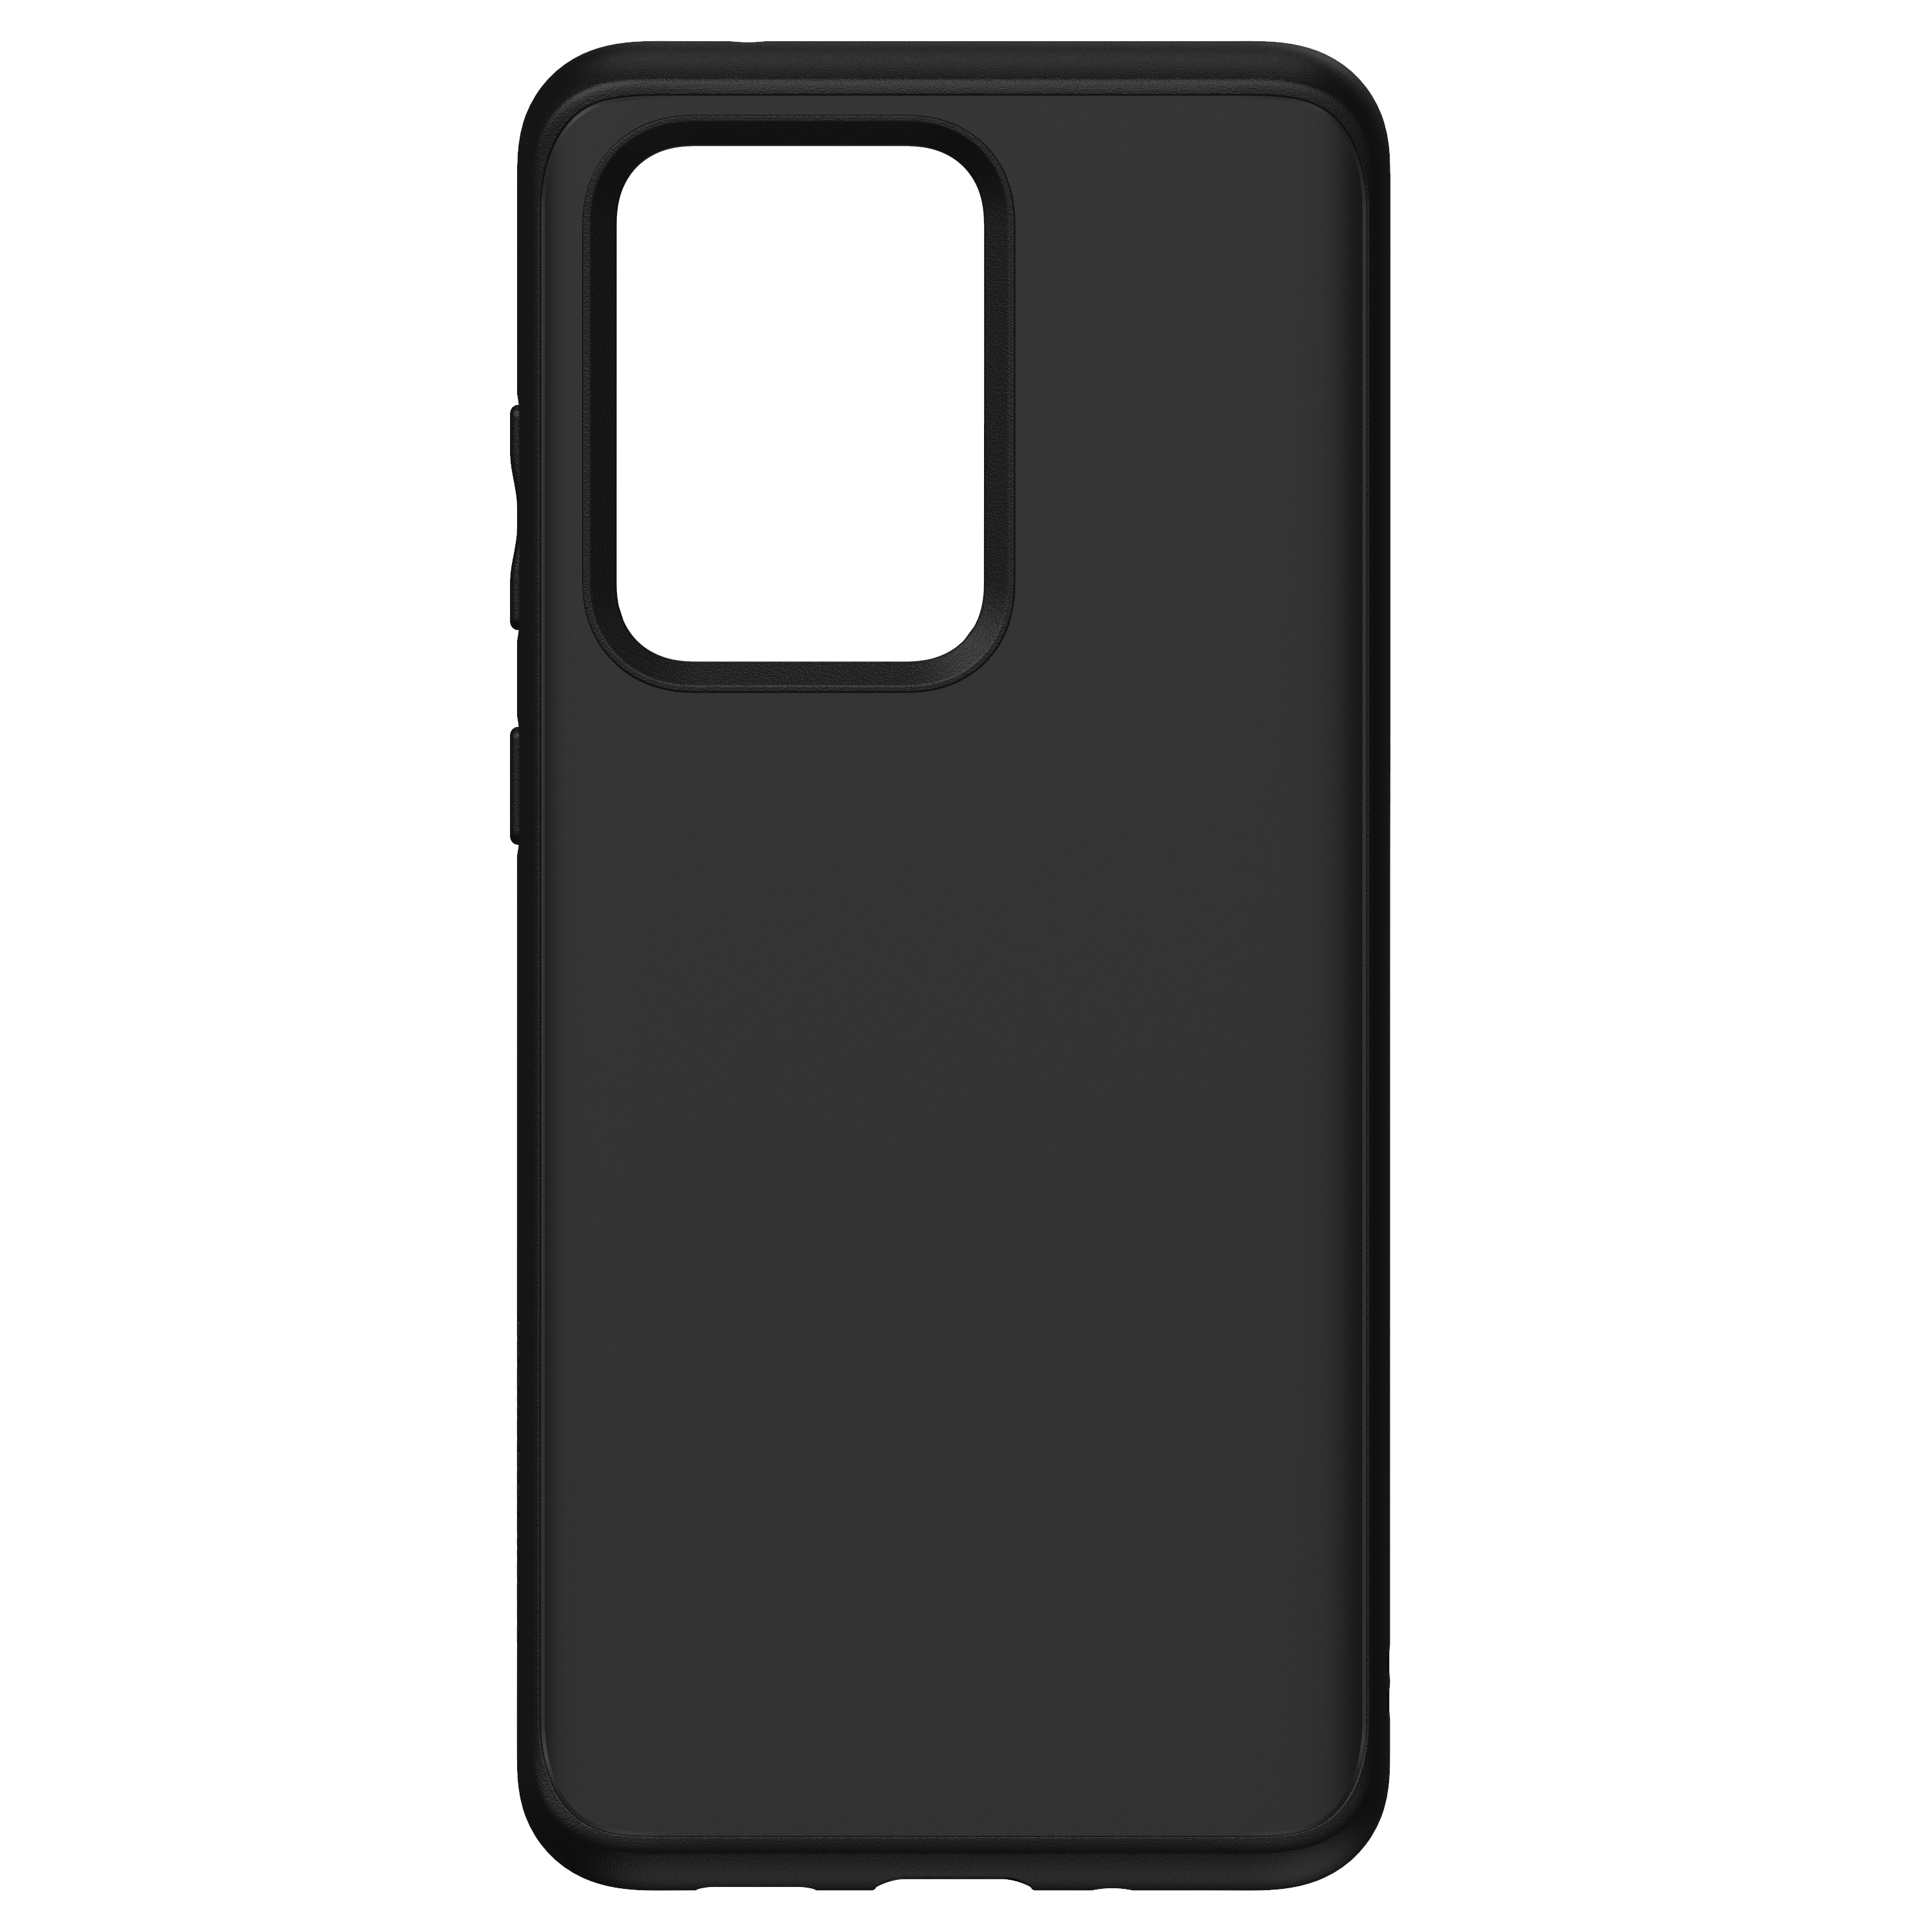 SolidSuit Cover Samsung Galaxy S20 Ultra Black